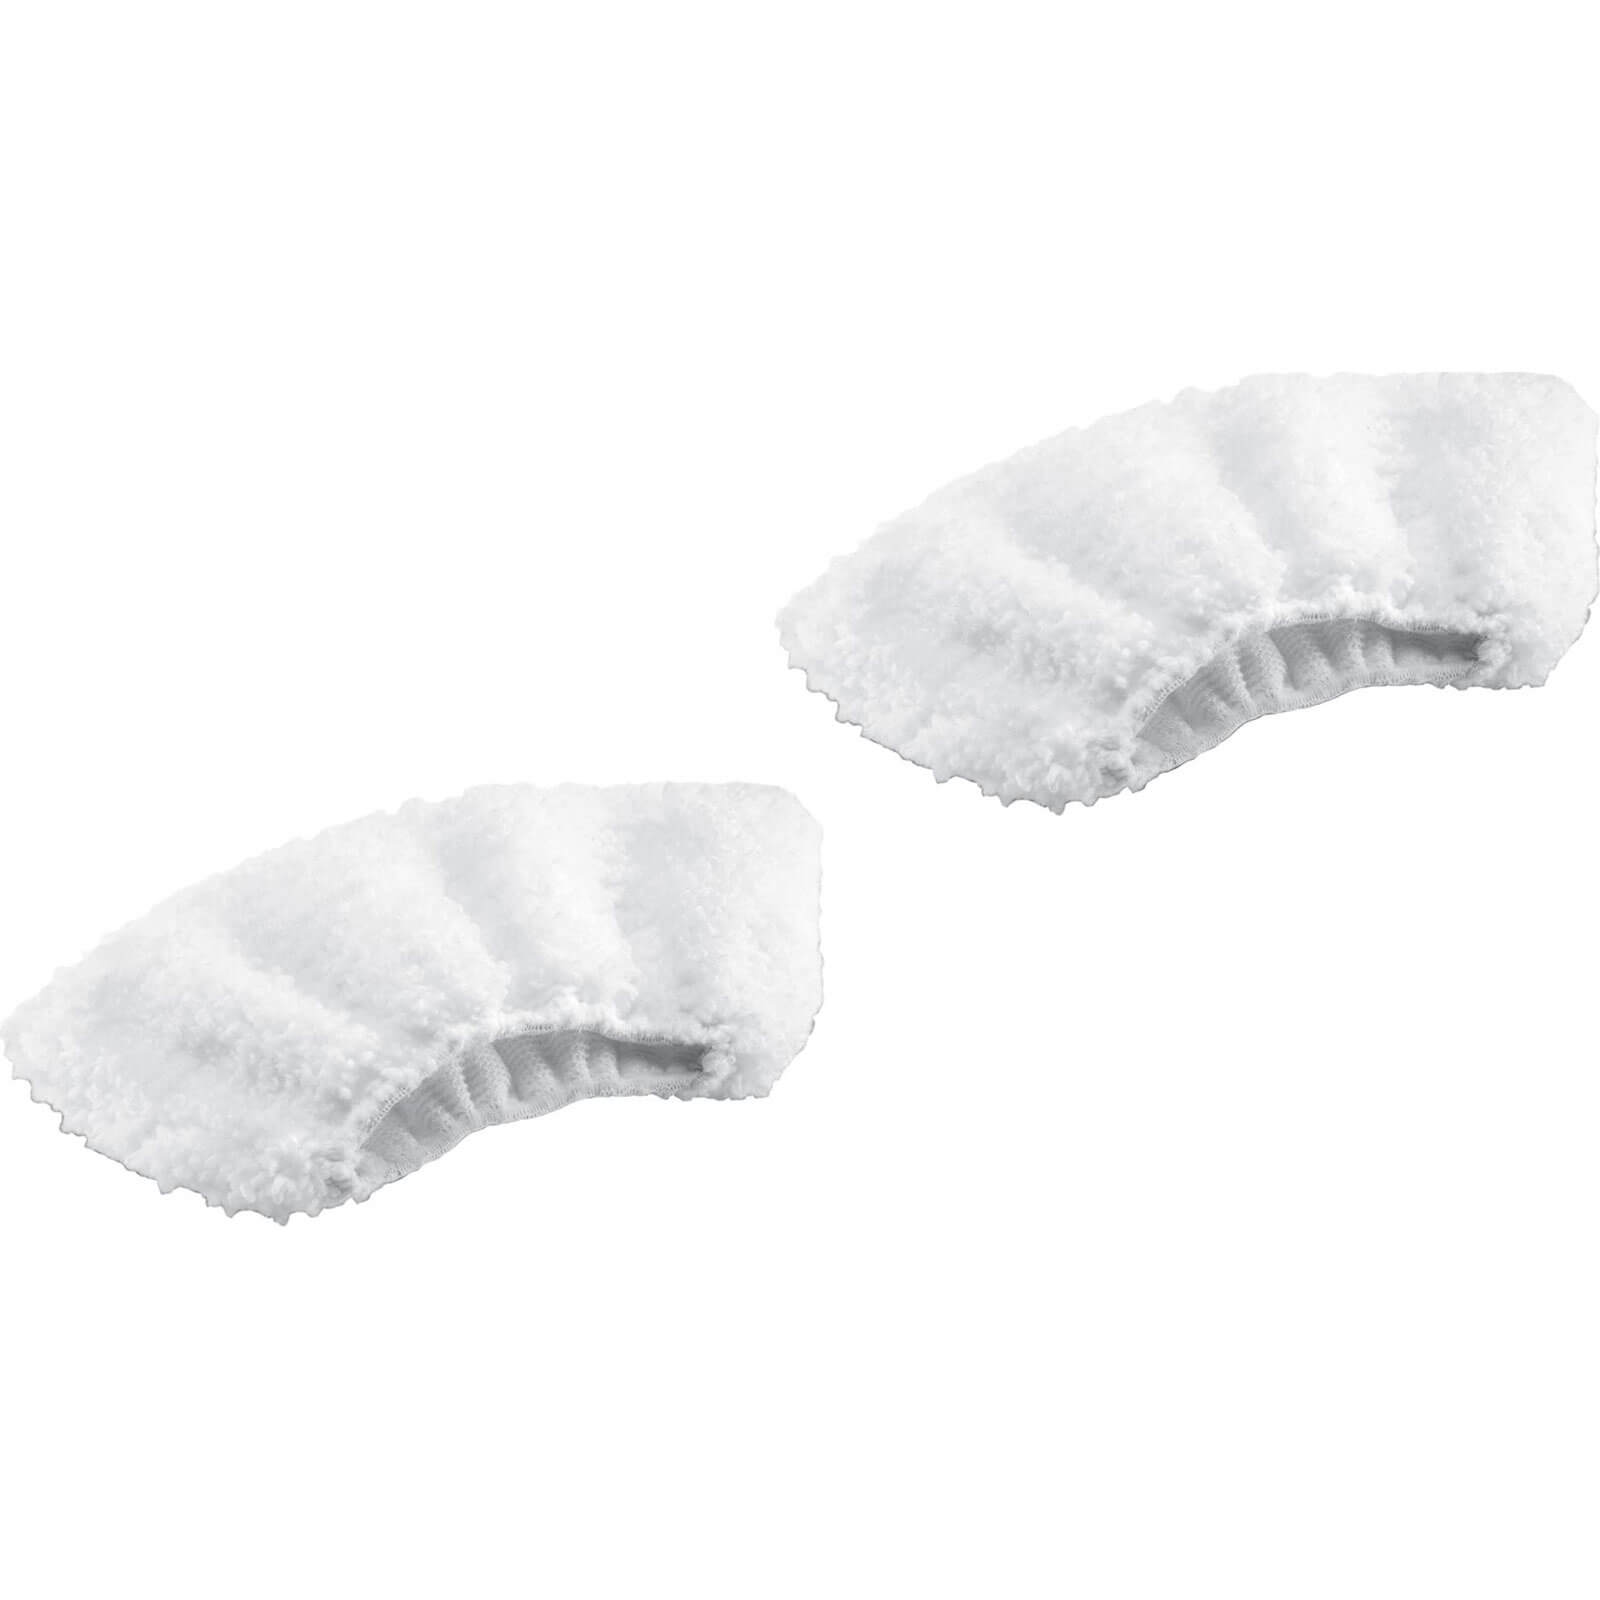 Image of Karcher Microfibre Hand Tool Covers for PUZZI Carpet Cleaners and SC EASYFIX, DE and SG Steam Cleaners Pack of 2